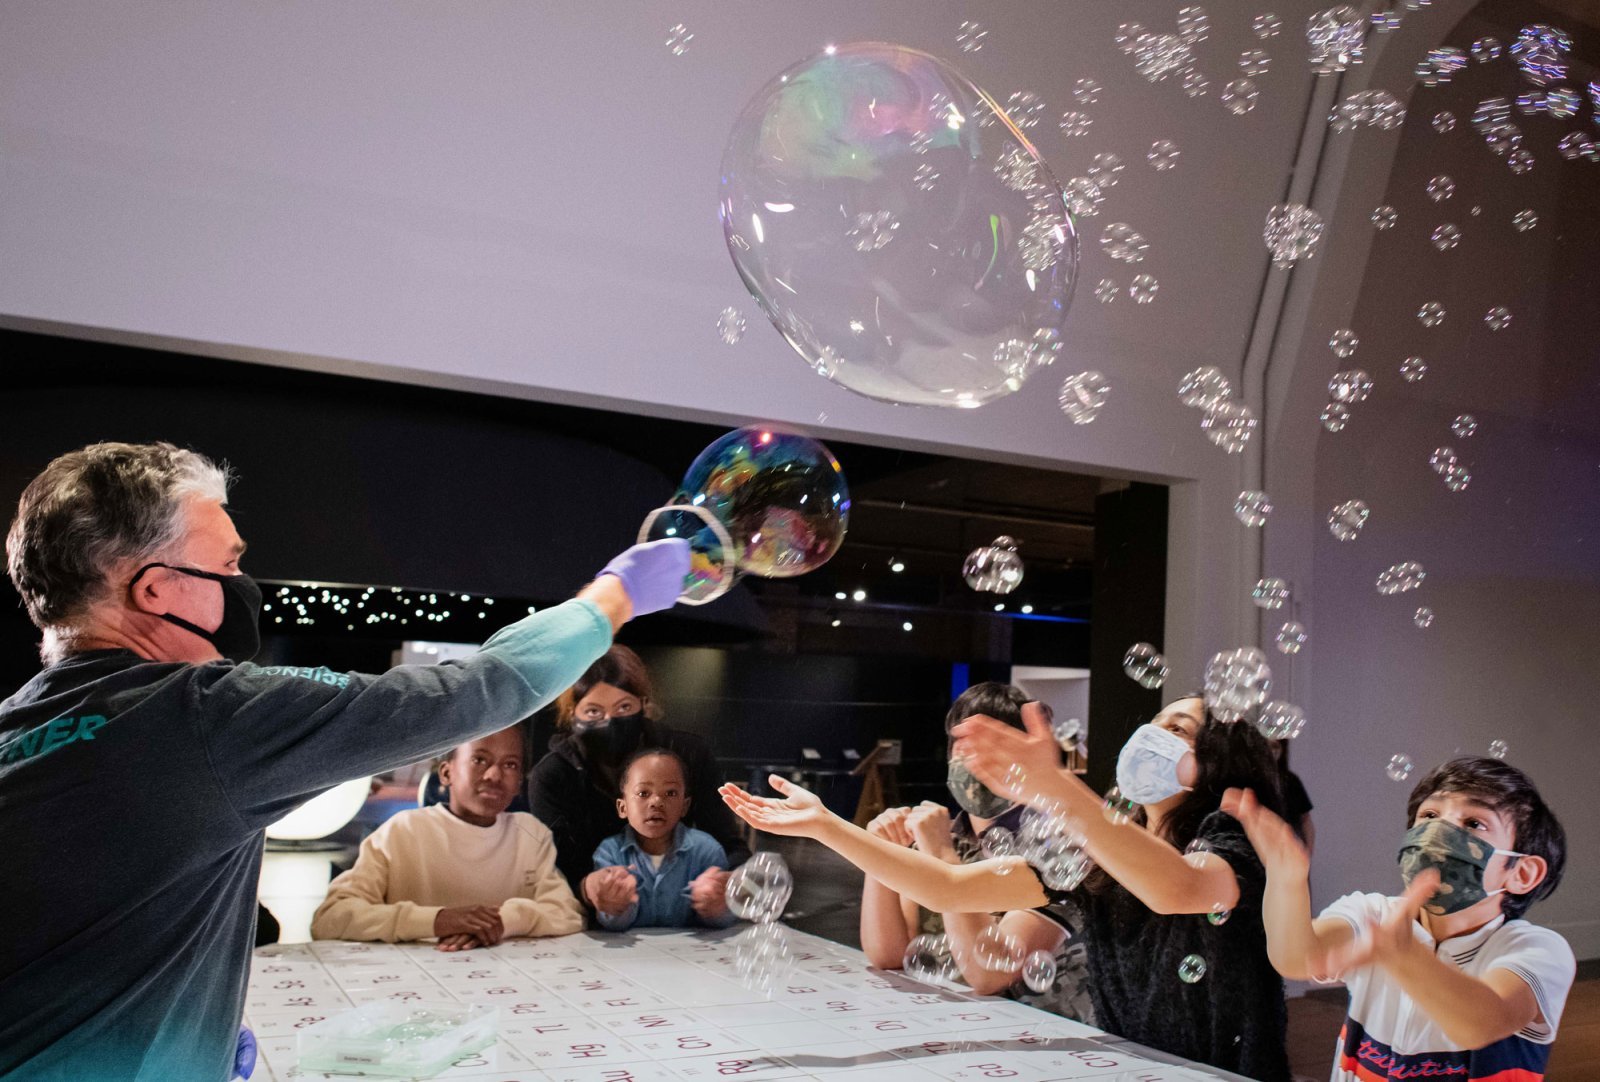 Visitor-and-Explainer-engaging-bubbles-demo-within-Wonderlab-The-Equinor-Gallery.jpg